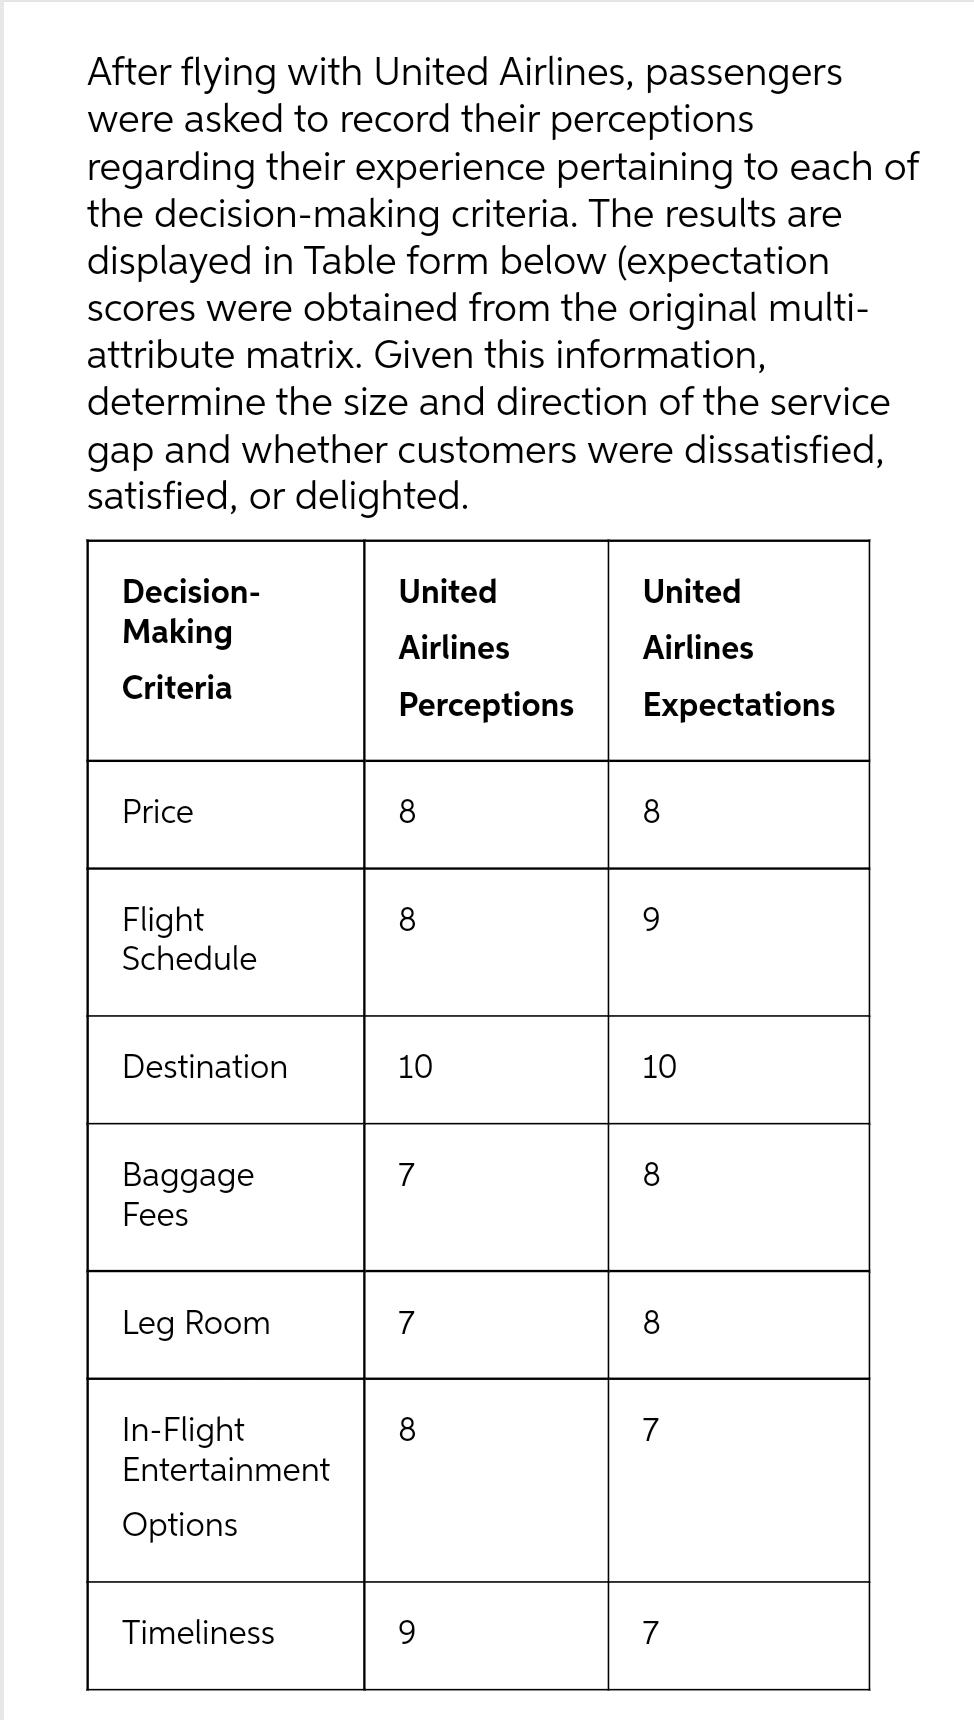 After flying with United Airlines, passengers
were asked to record their perceptions
regarding their experience pertaining to each of
the decision-making criteria. The results are
displayed in Table form below (expectation
scores were obtained from the original multi-
attribute matrix. Given this information,
determine the size and direction of the service
gap and whether customers were dissatisfied,
satisfied, or delighted.
Decision-
Making
Criteria
Price
Flight
Schedule
Destination
Baggage
Fees
Leg Room
In-Flight
Entertainment
Options
Timeliness
United
Airlines
Perceptions
8
8
10
7
7
8
9
United
Airlines
Expectations
8
9
10
8
8
7
7